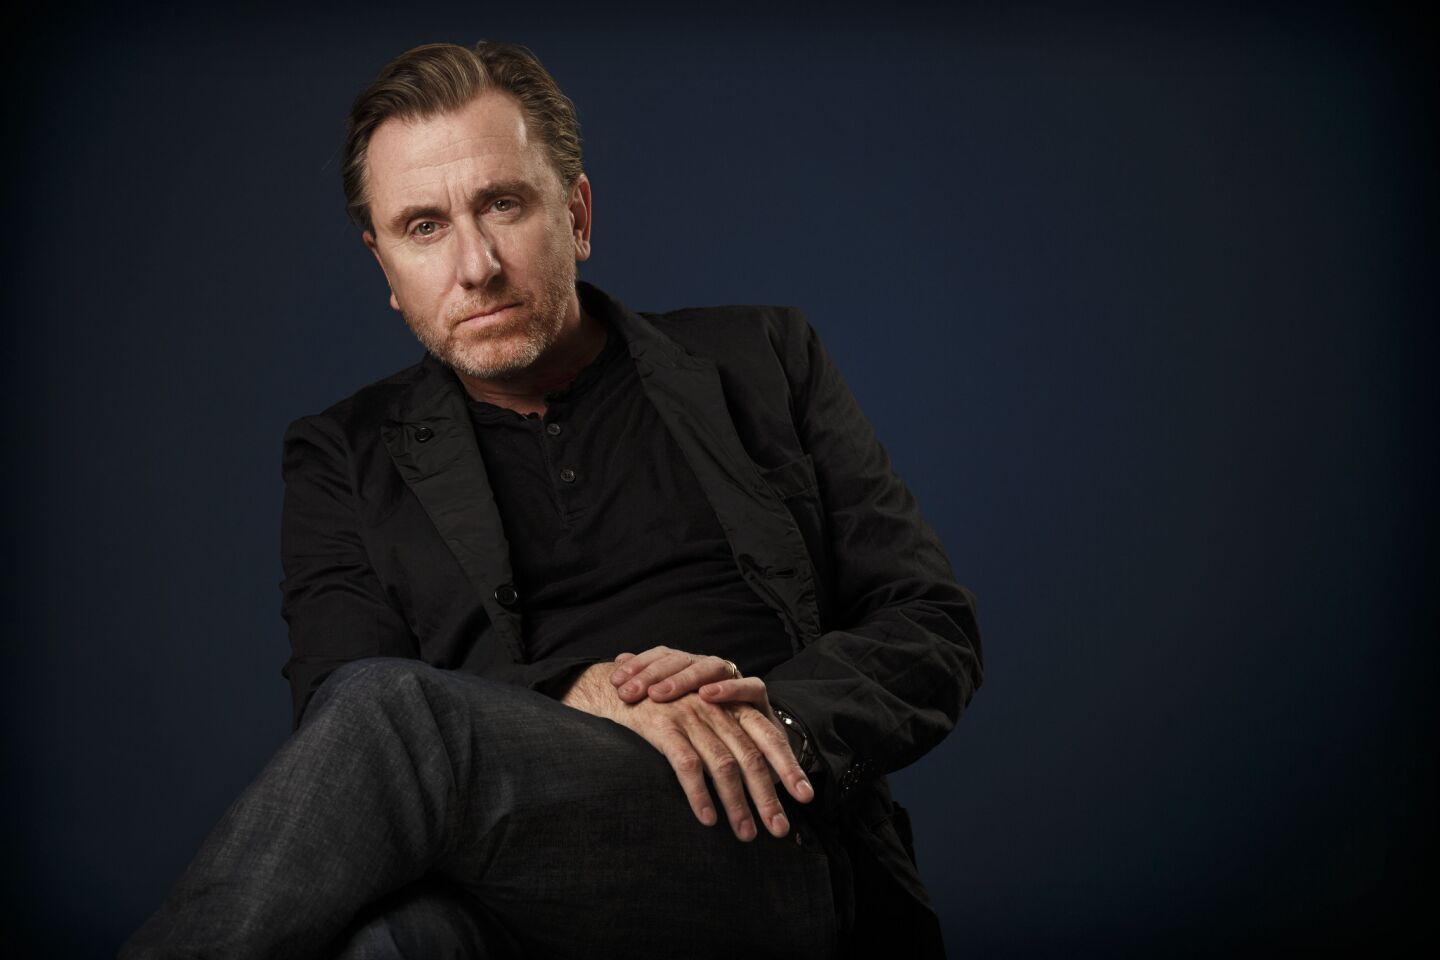 Celebrity portraits by The Times | Tim Roth